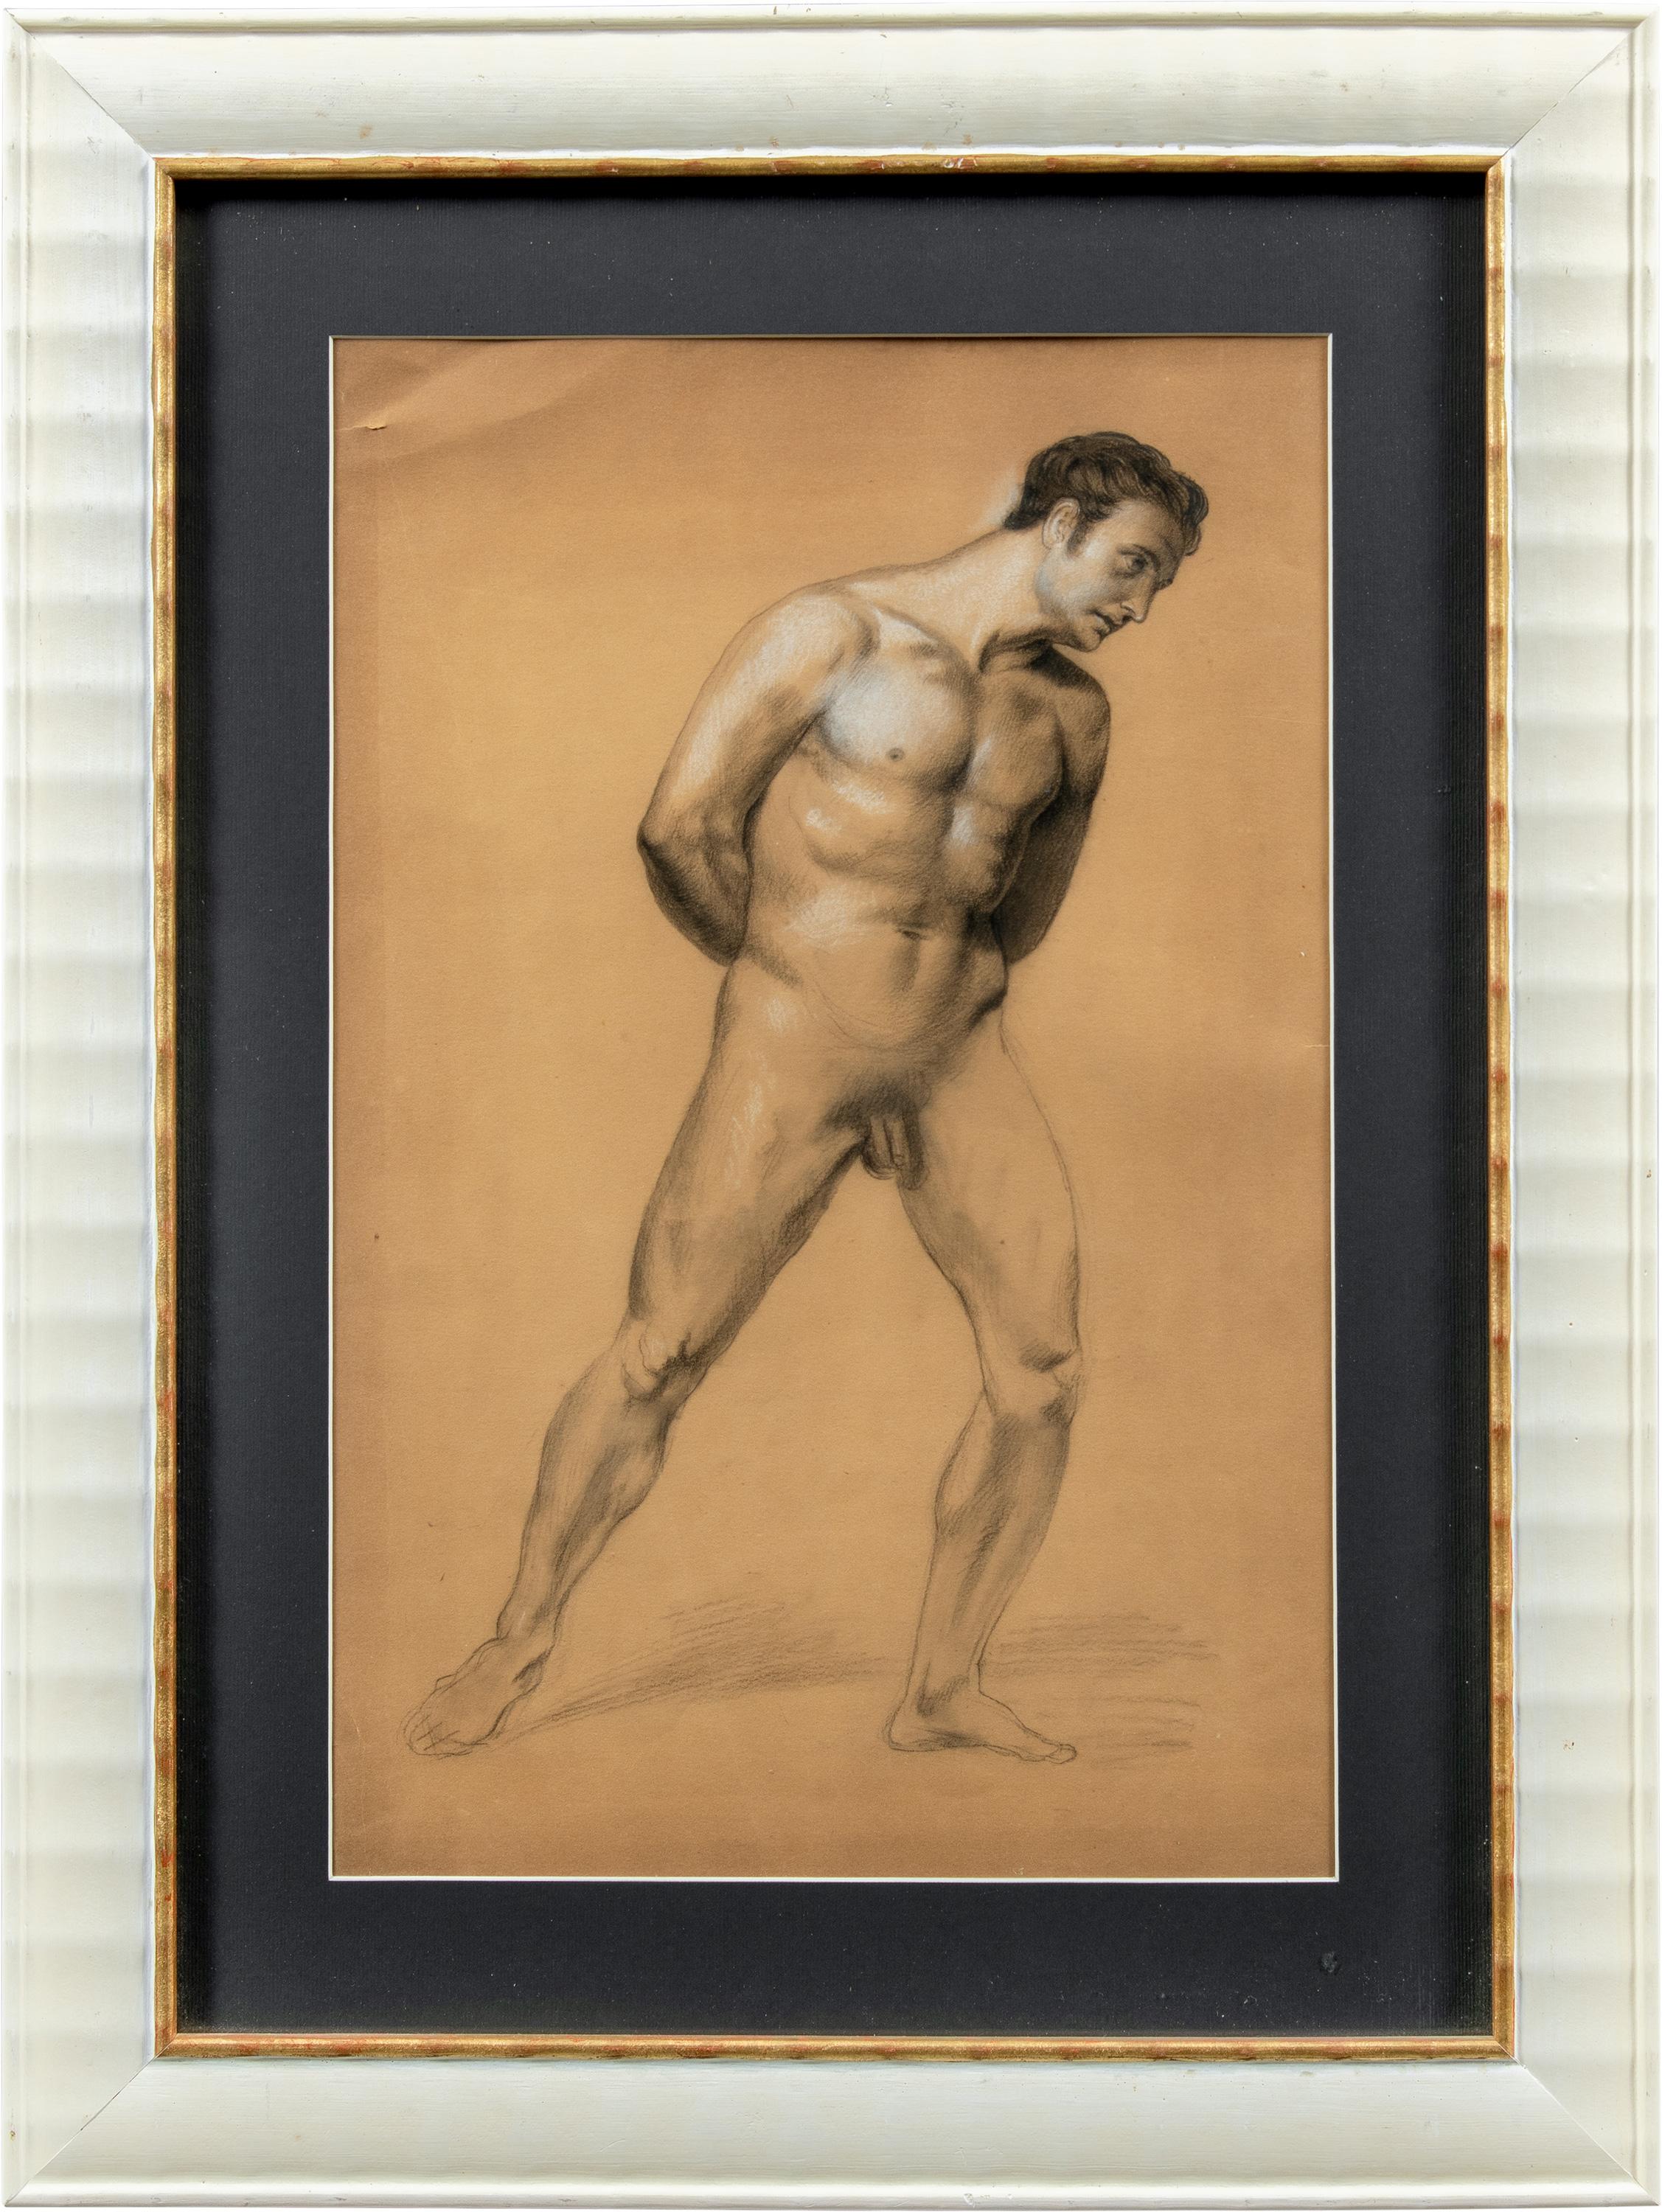 Unknown Portrait Painting - Academic nudes painter - 19th century figure drawing - Pencil paper Italy